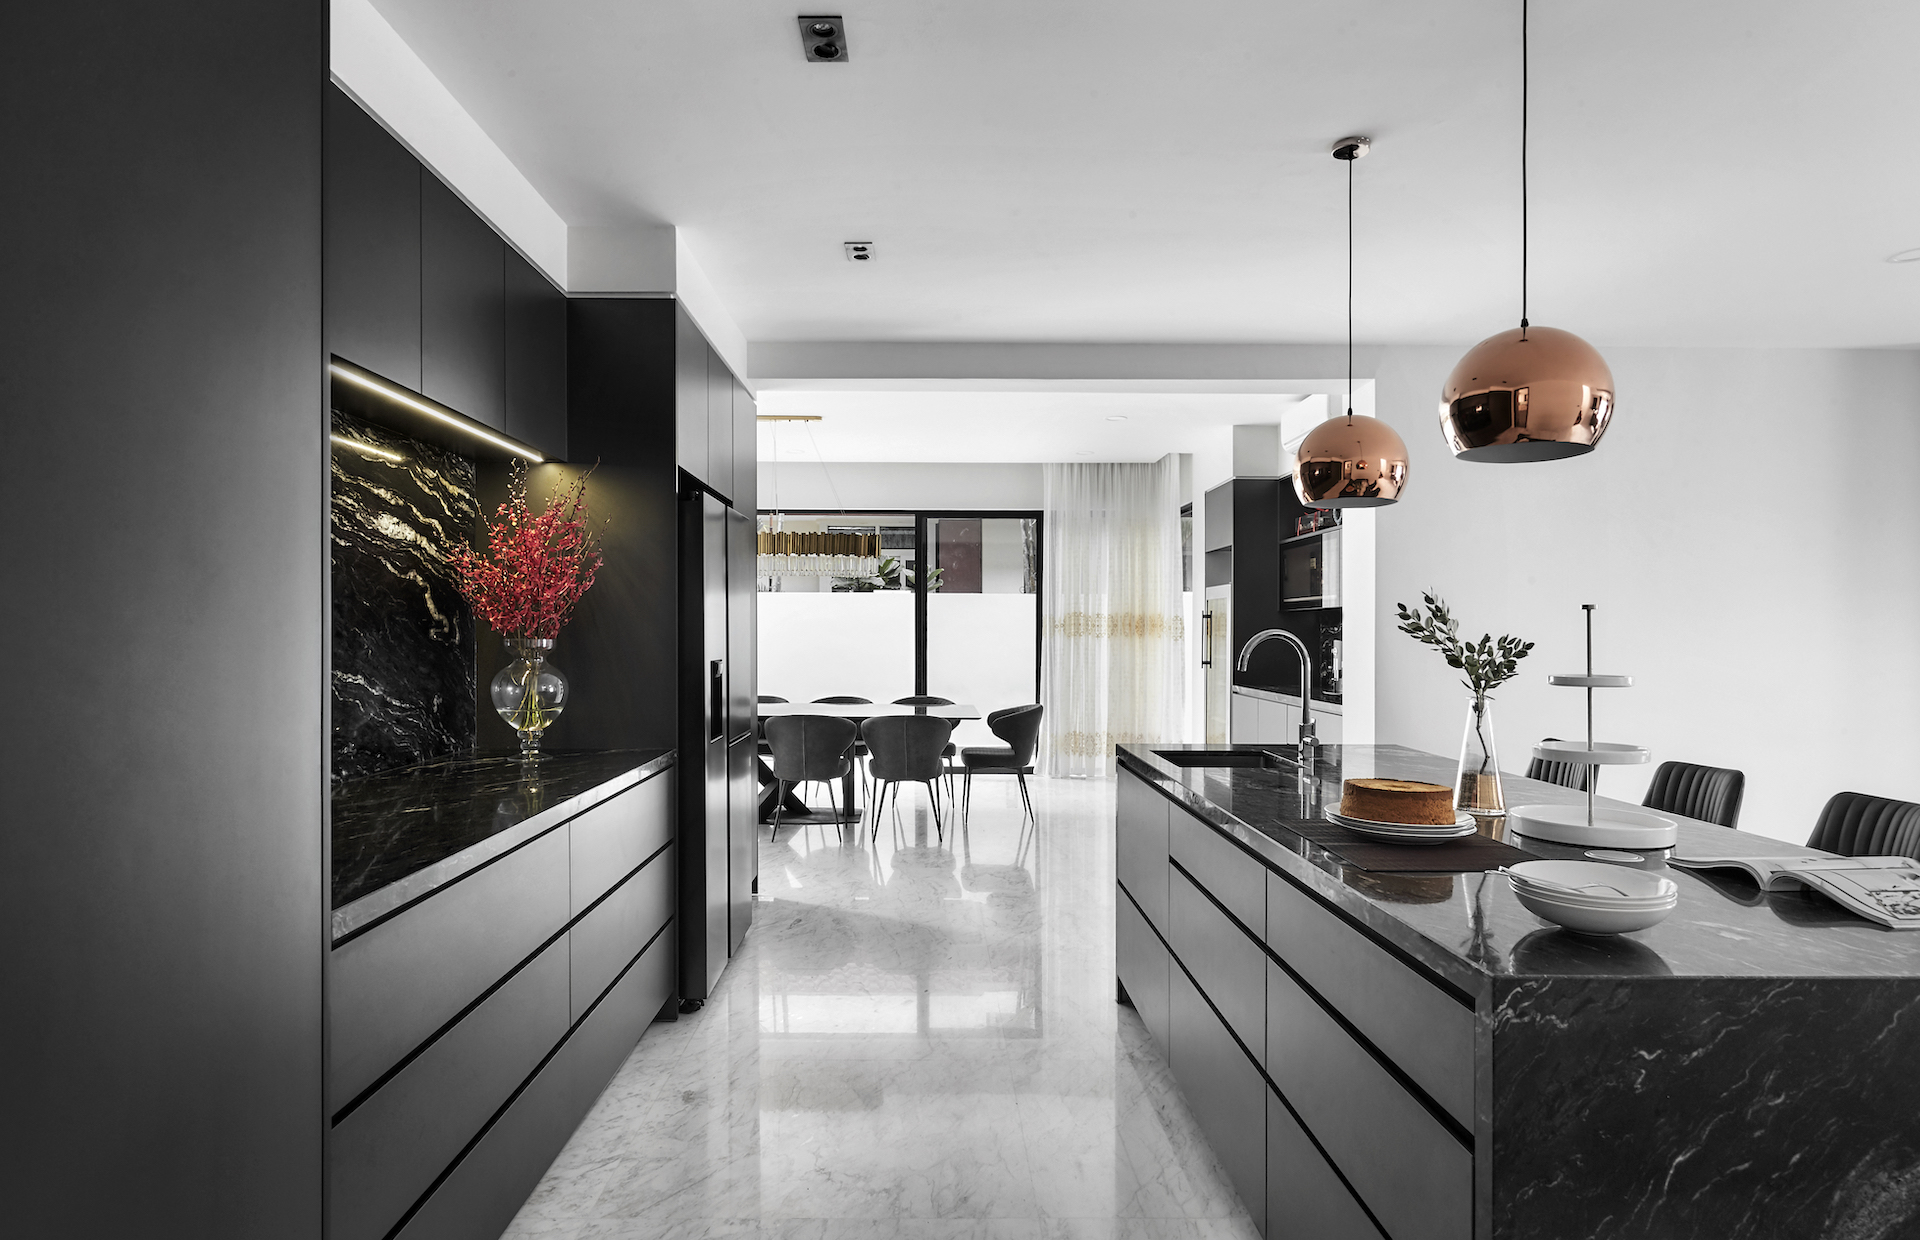 A black and white kitchen with marble counter tops.